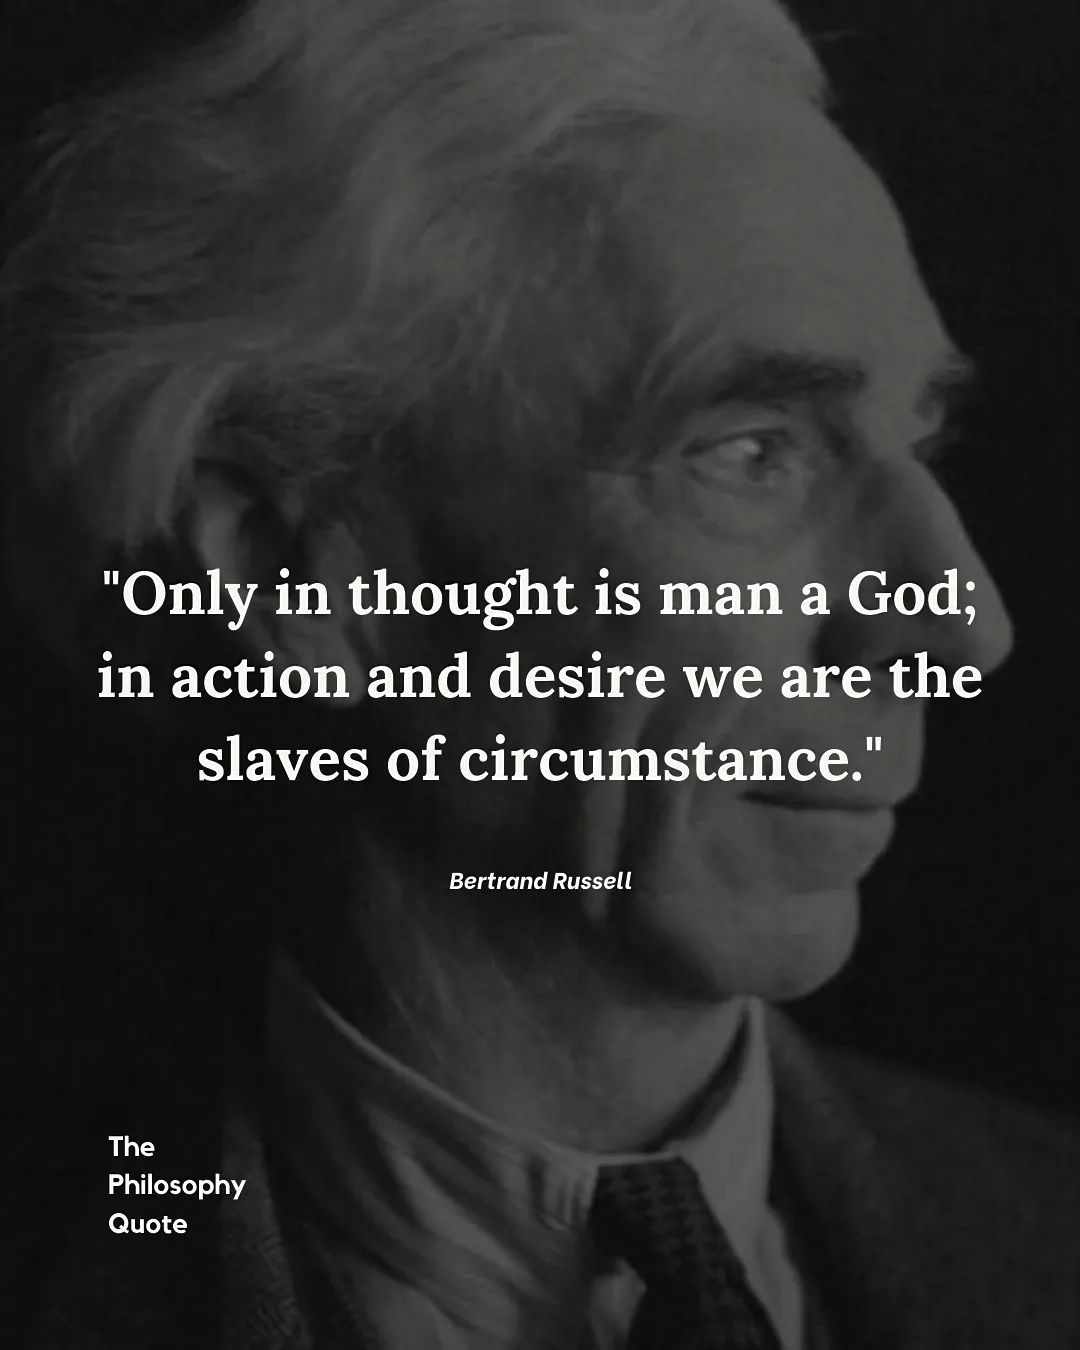 Only in thought is man a God; in action and desire we are the slaves of circumstance.